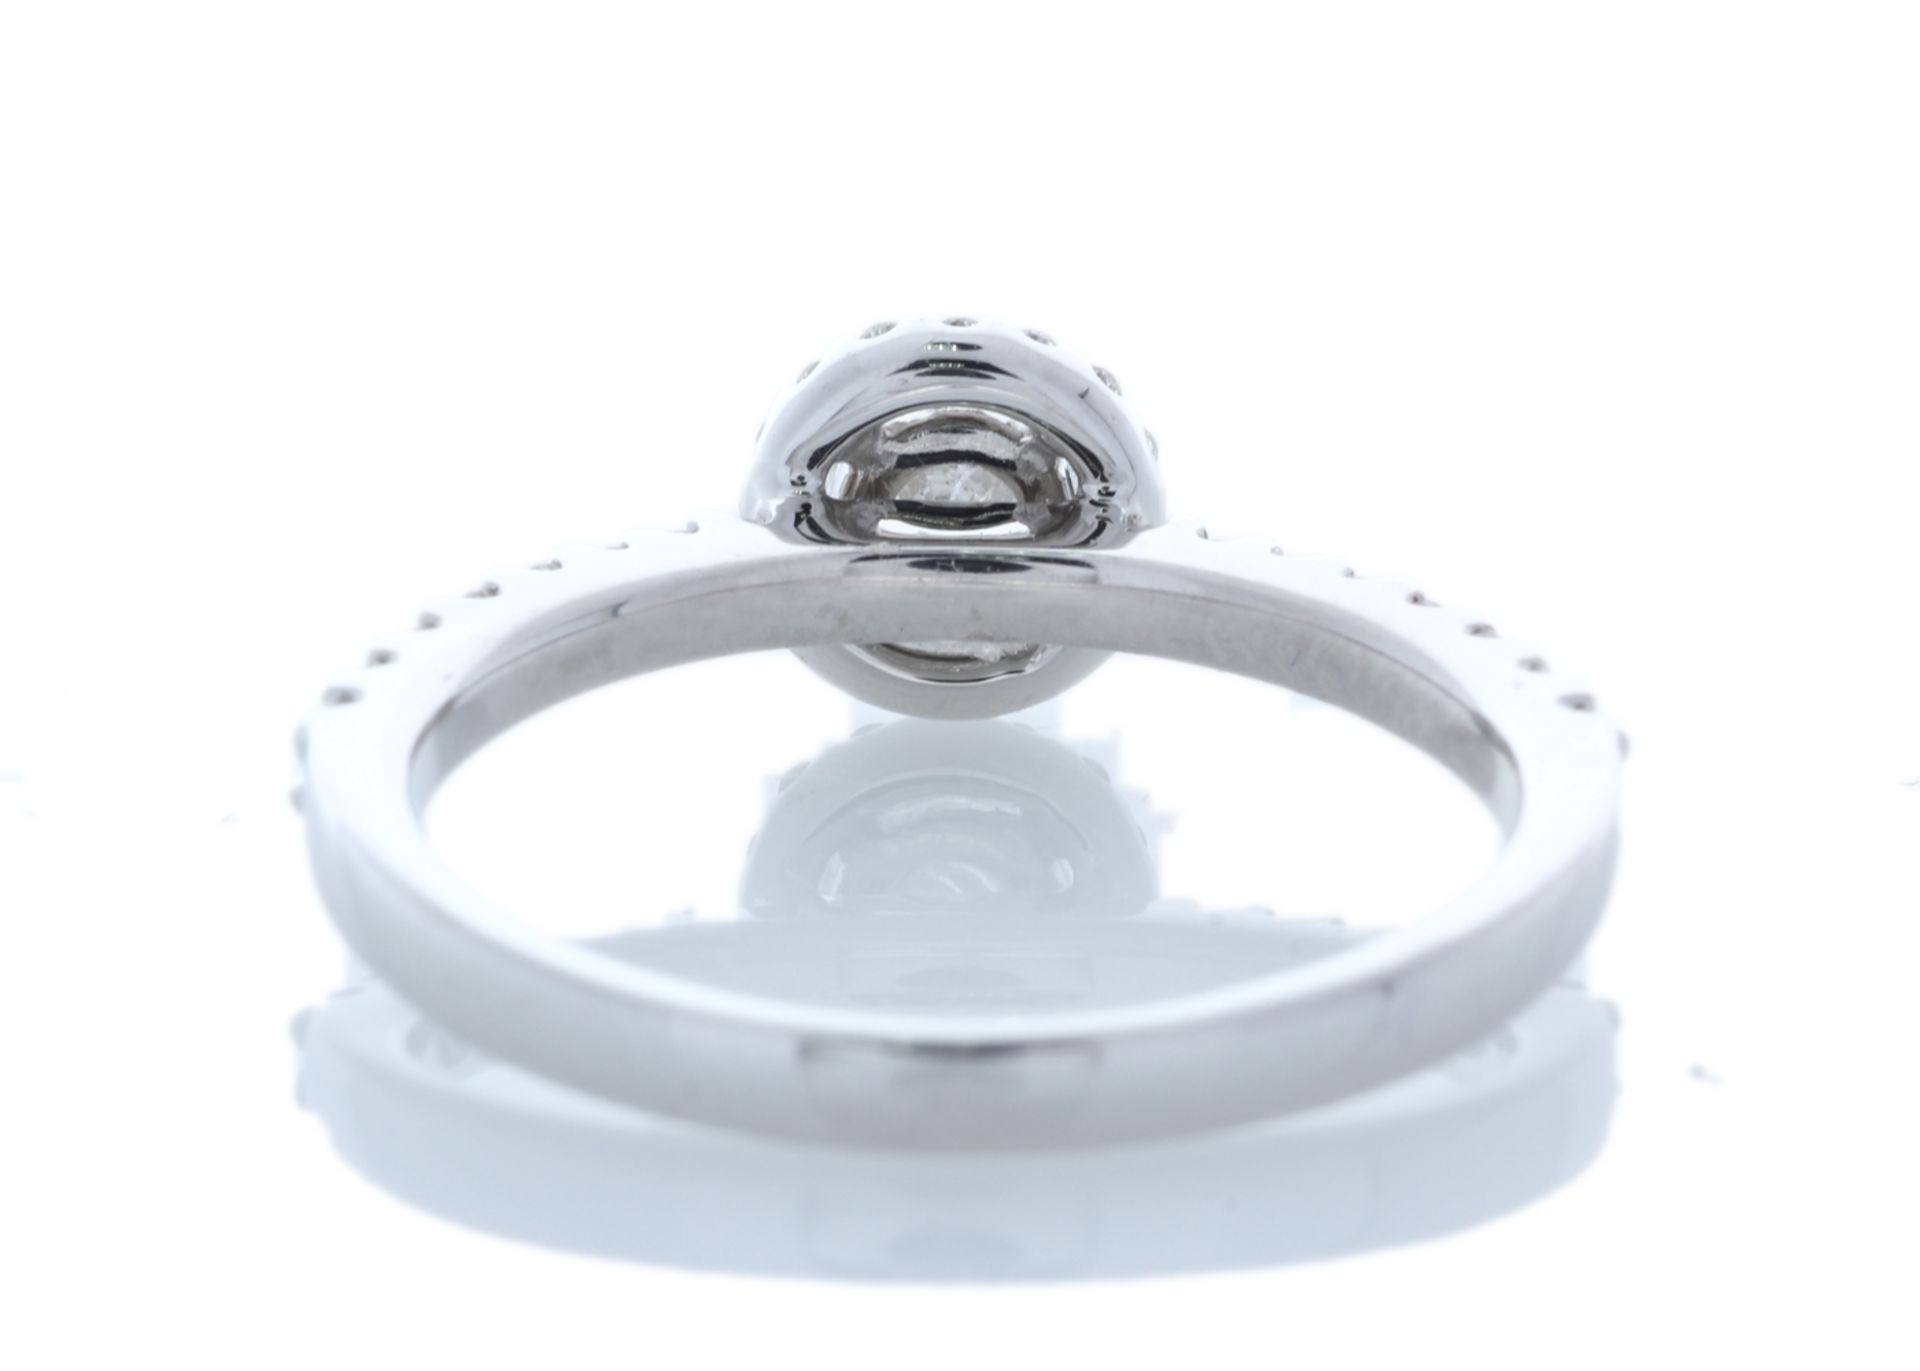 18ct White Gold Single Stone With Halo Setting Ring (0.31) 0.63 Carats - Valued by GIE £3,645.00 - - Image 3 of 5